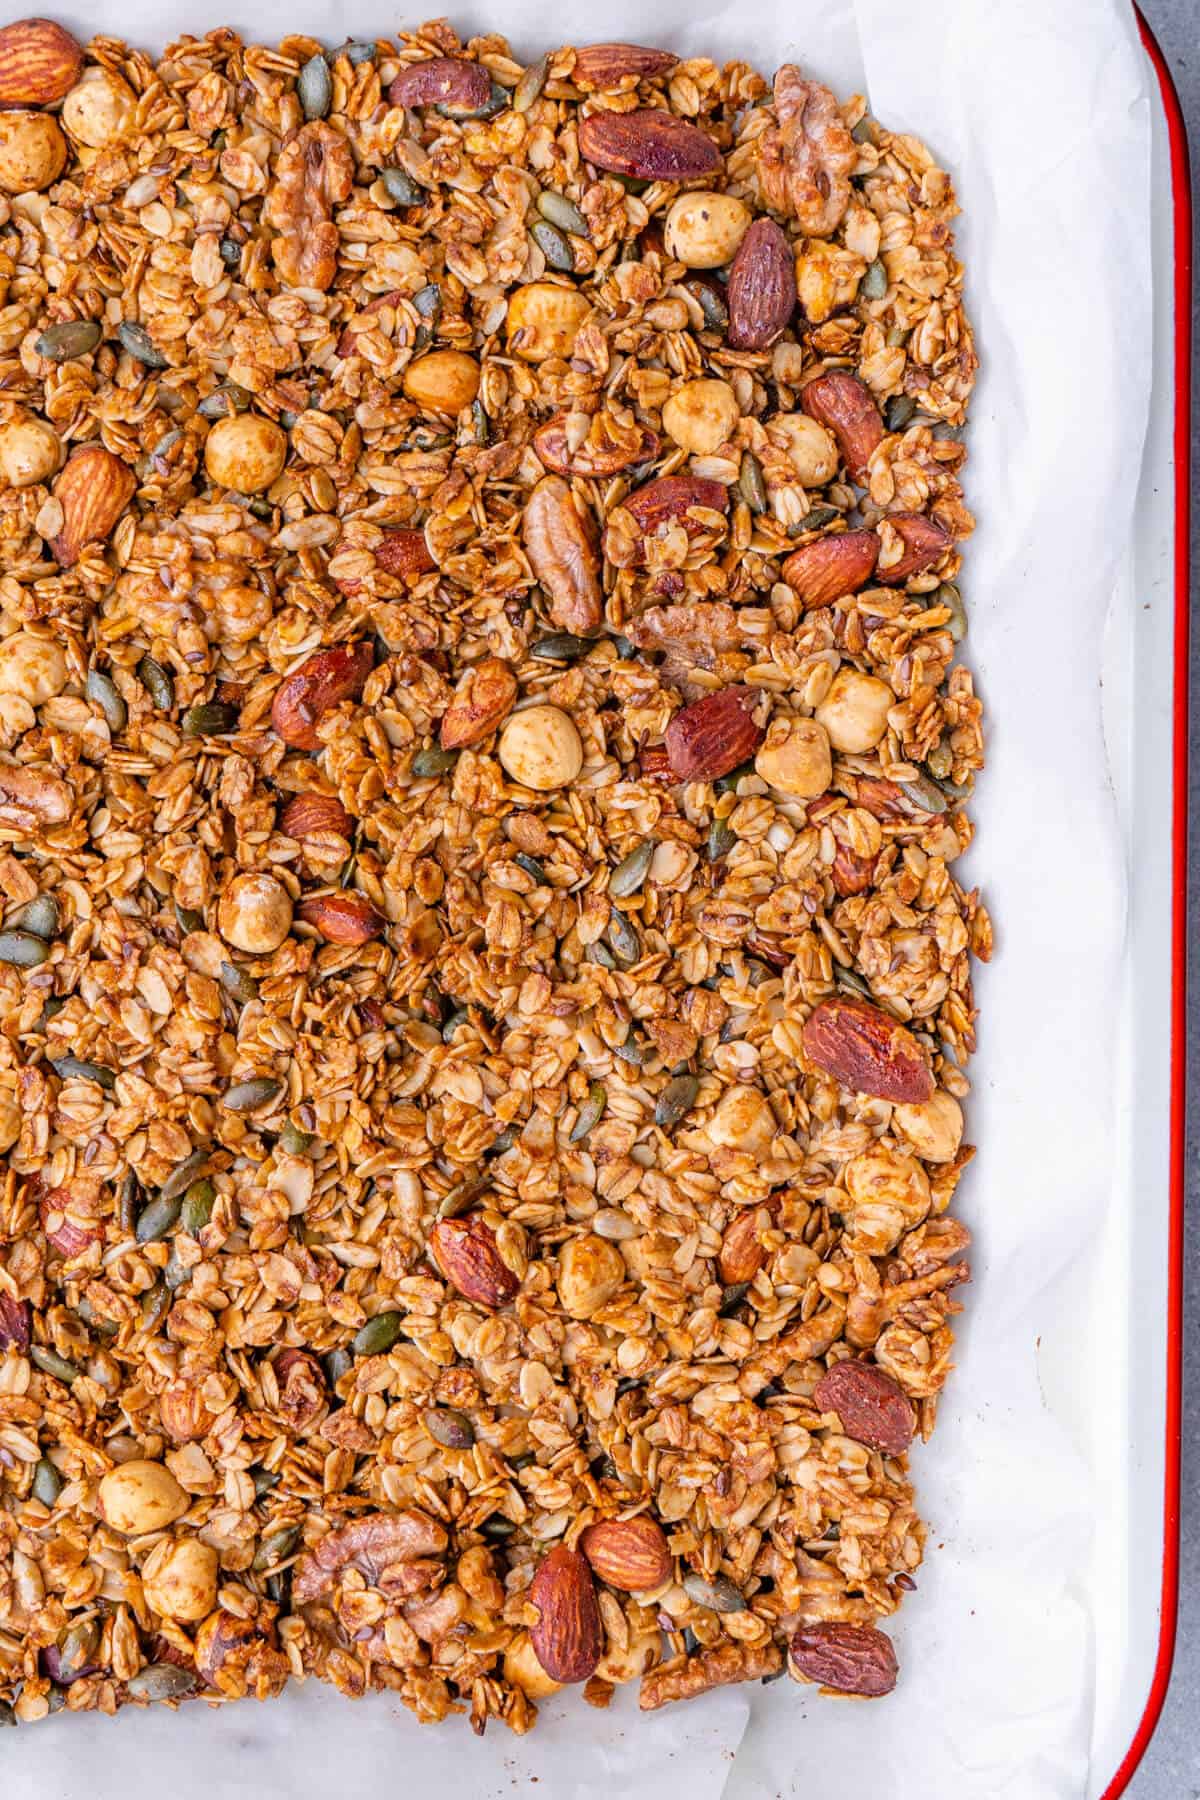 Healthy homemade granola resting on a baking tray